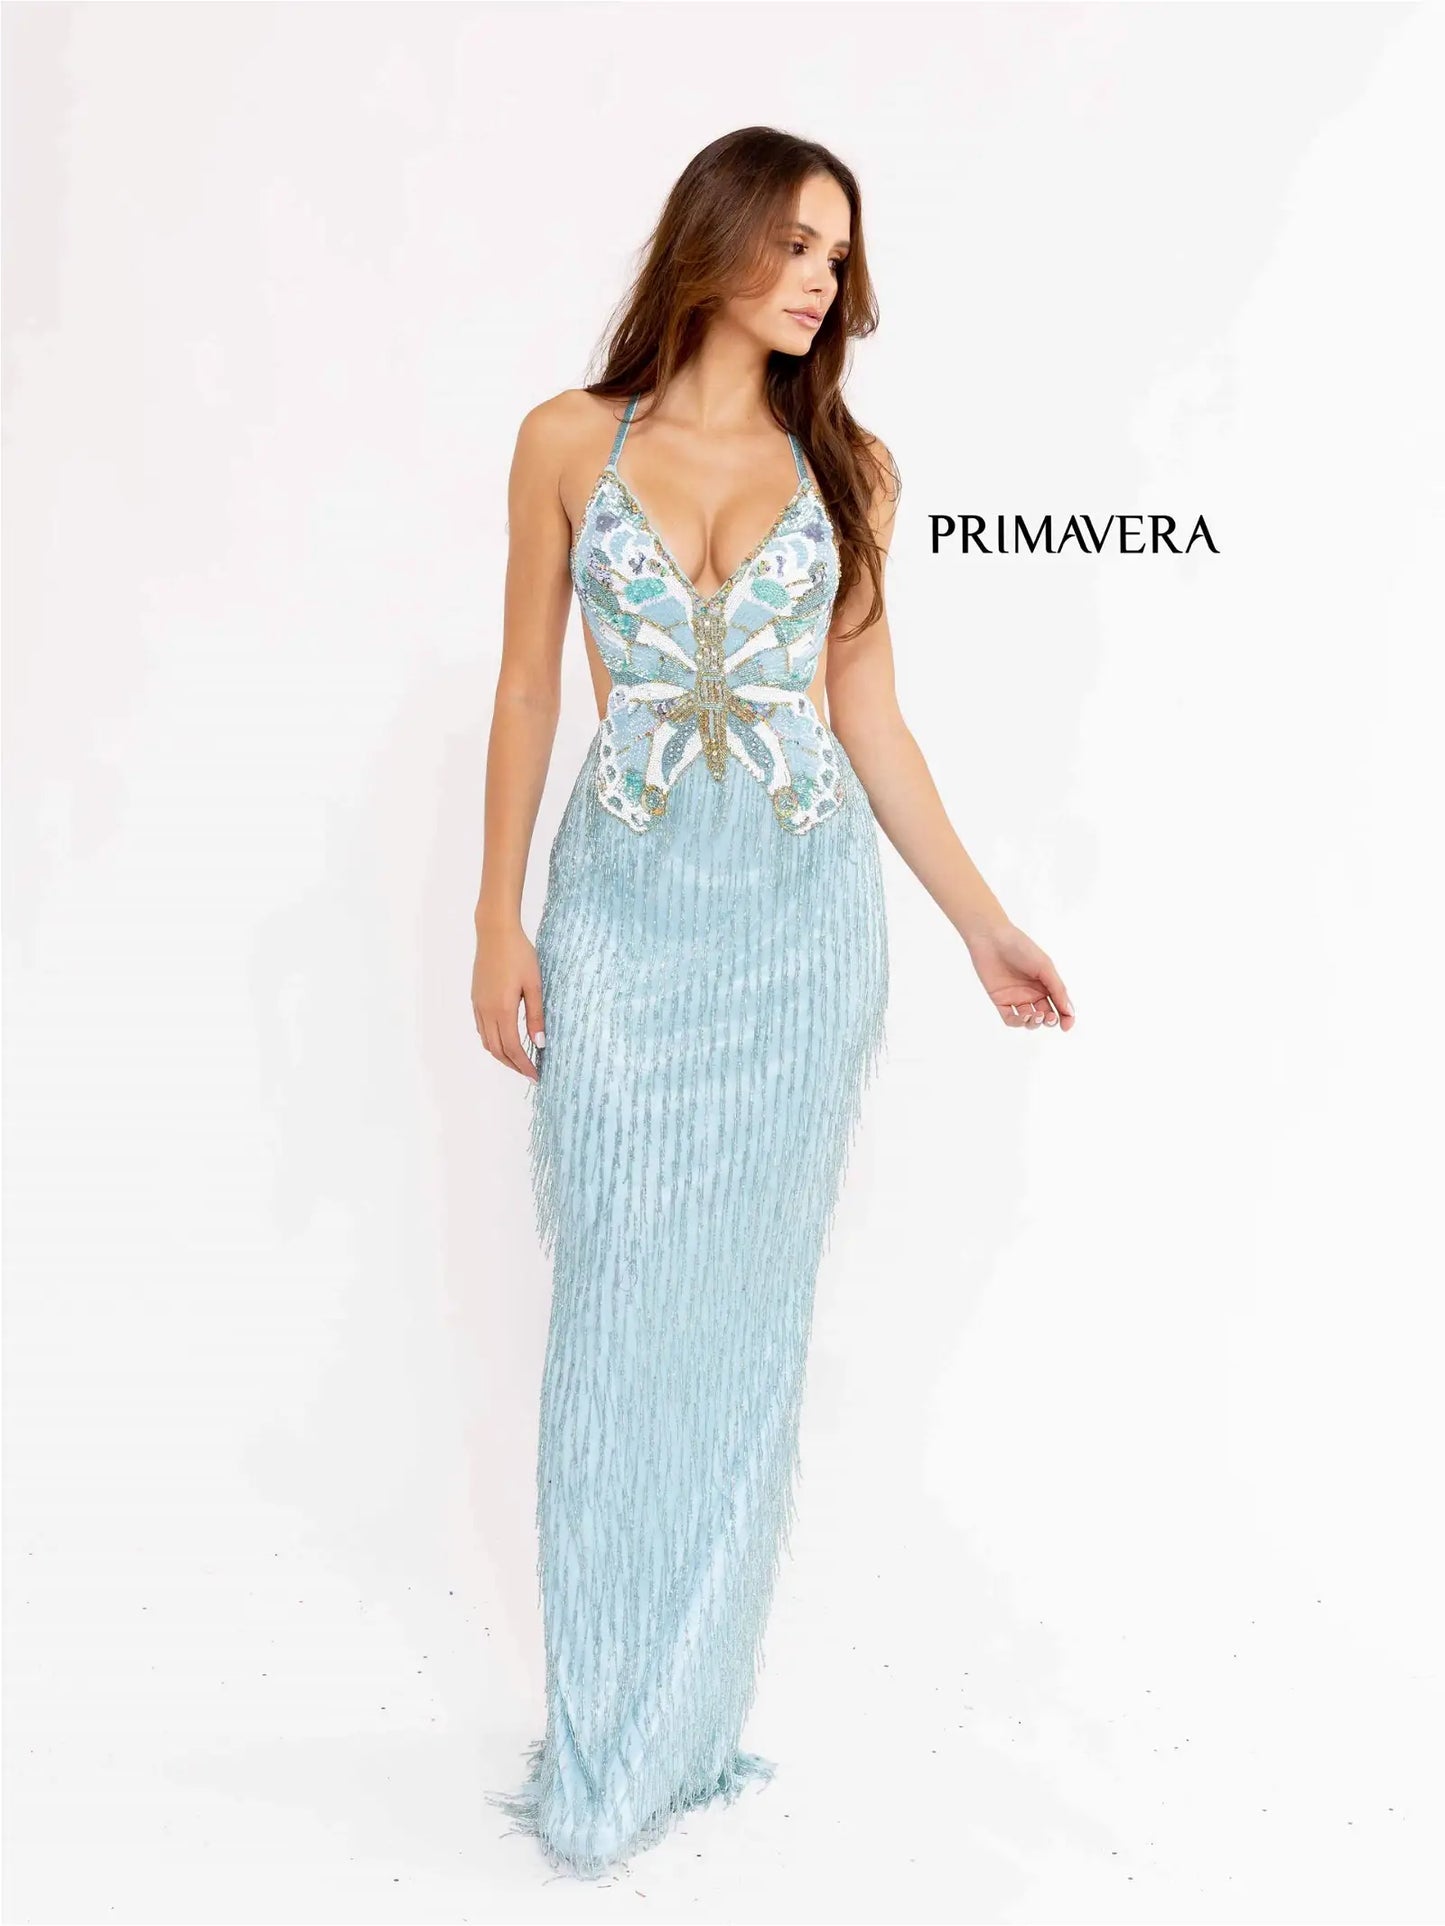 Primavera Couture 3966 Prom Dress Long Fringe Beaded Gown Butterfly Backless Formal